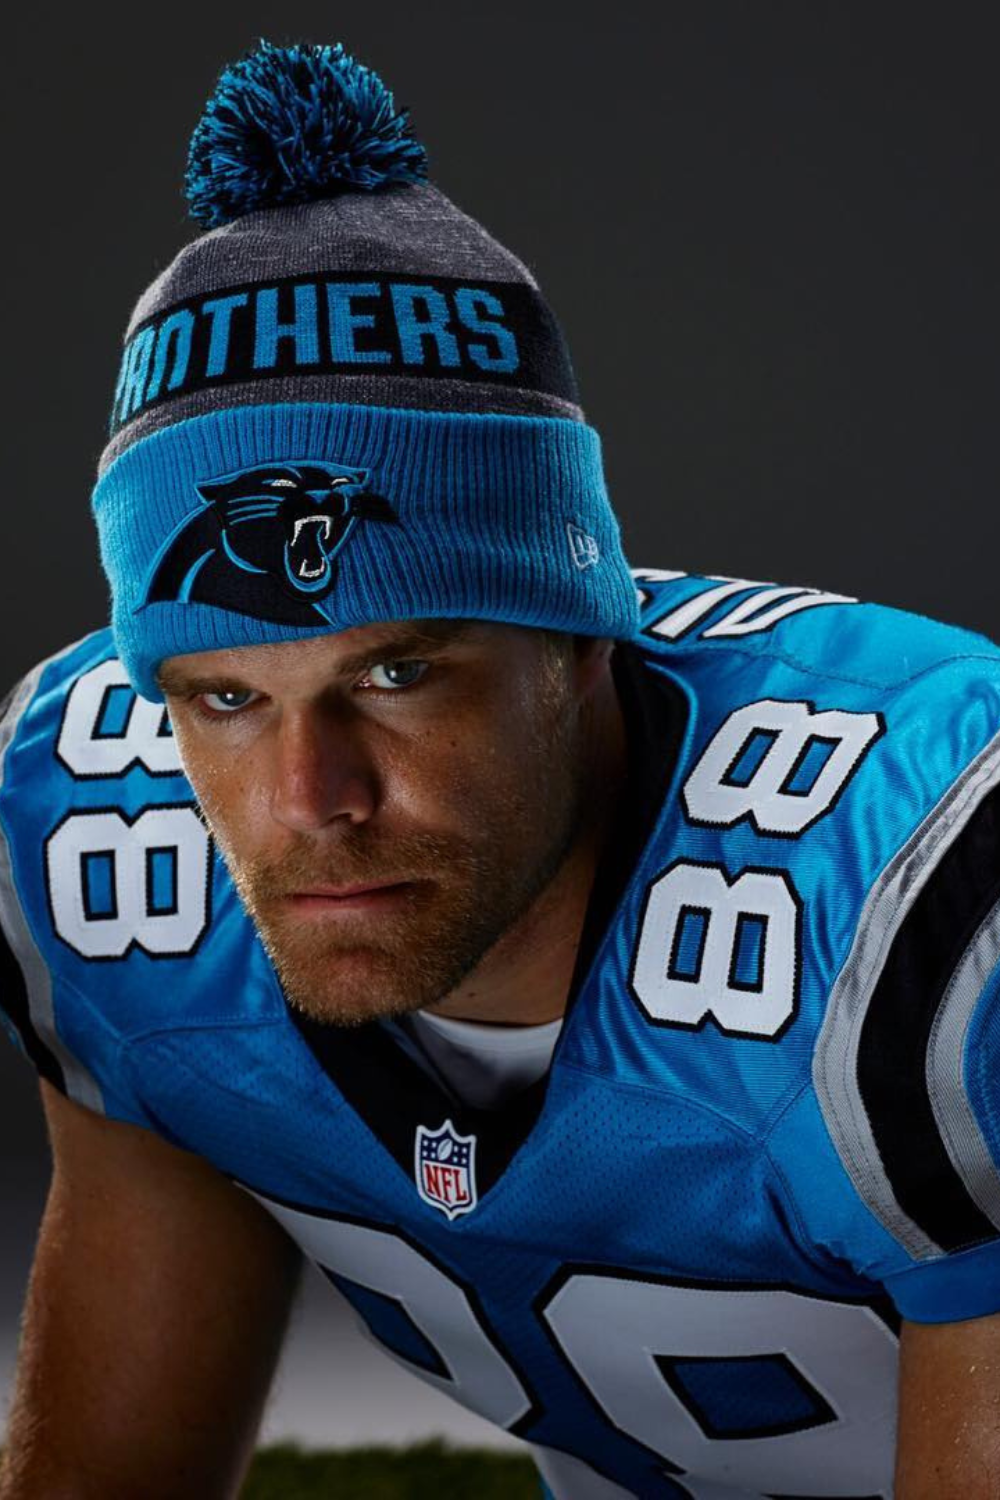 Former NFL Player Greg Olsen During His Photoshoot At Panthers